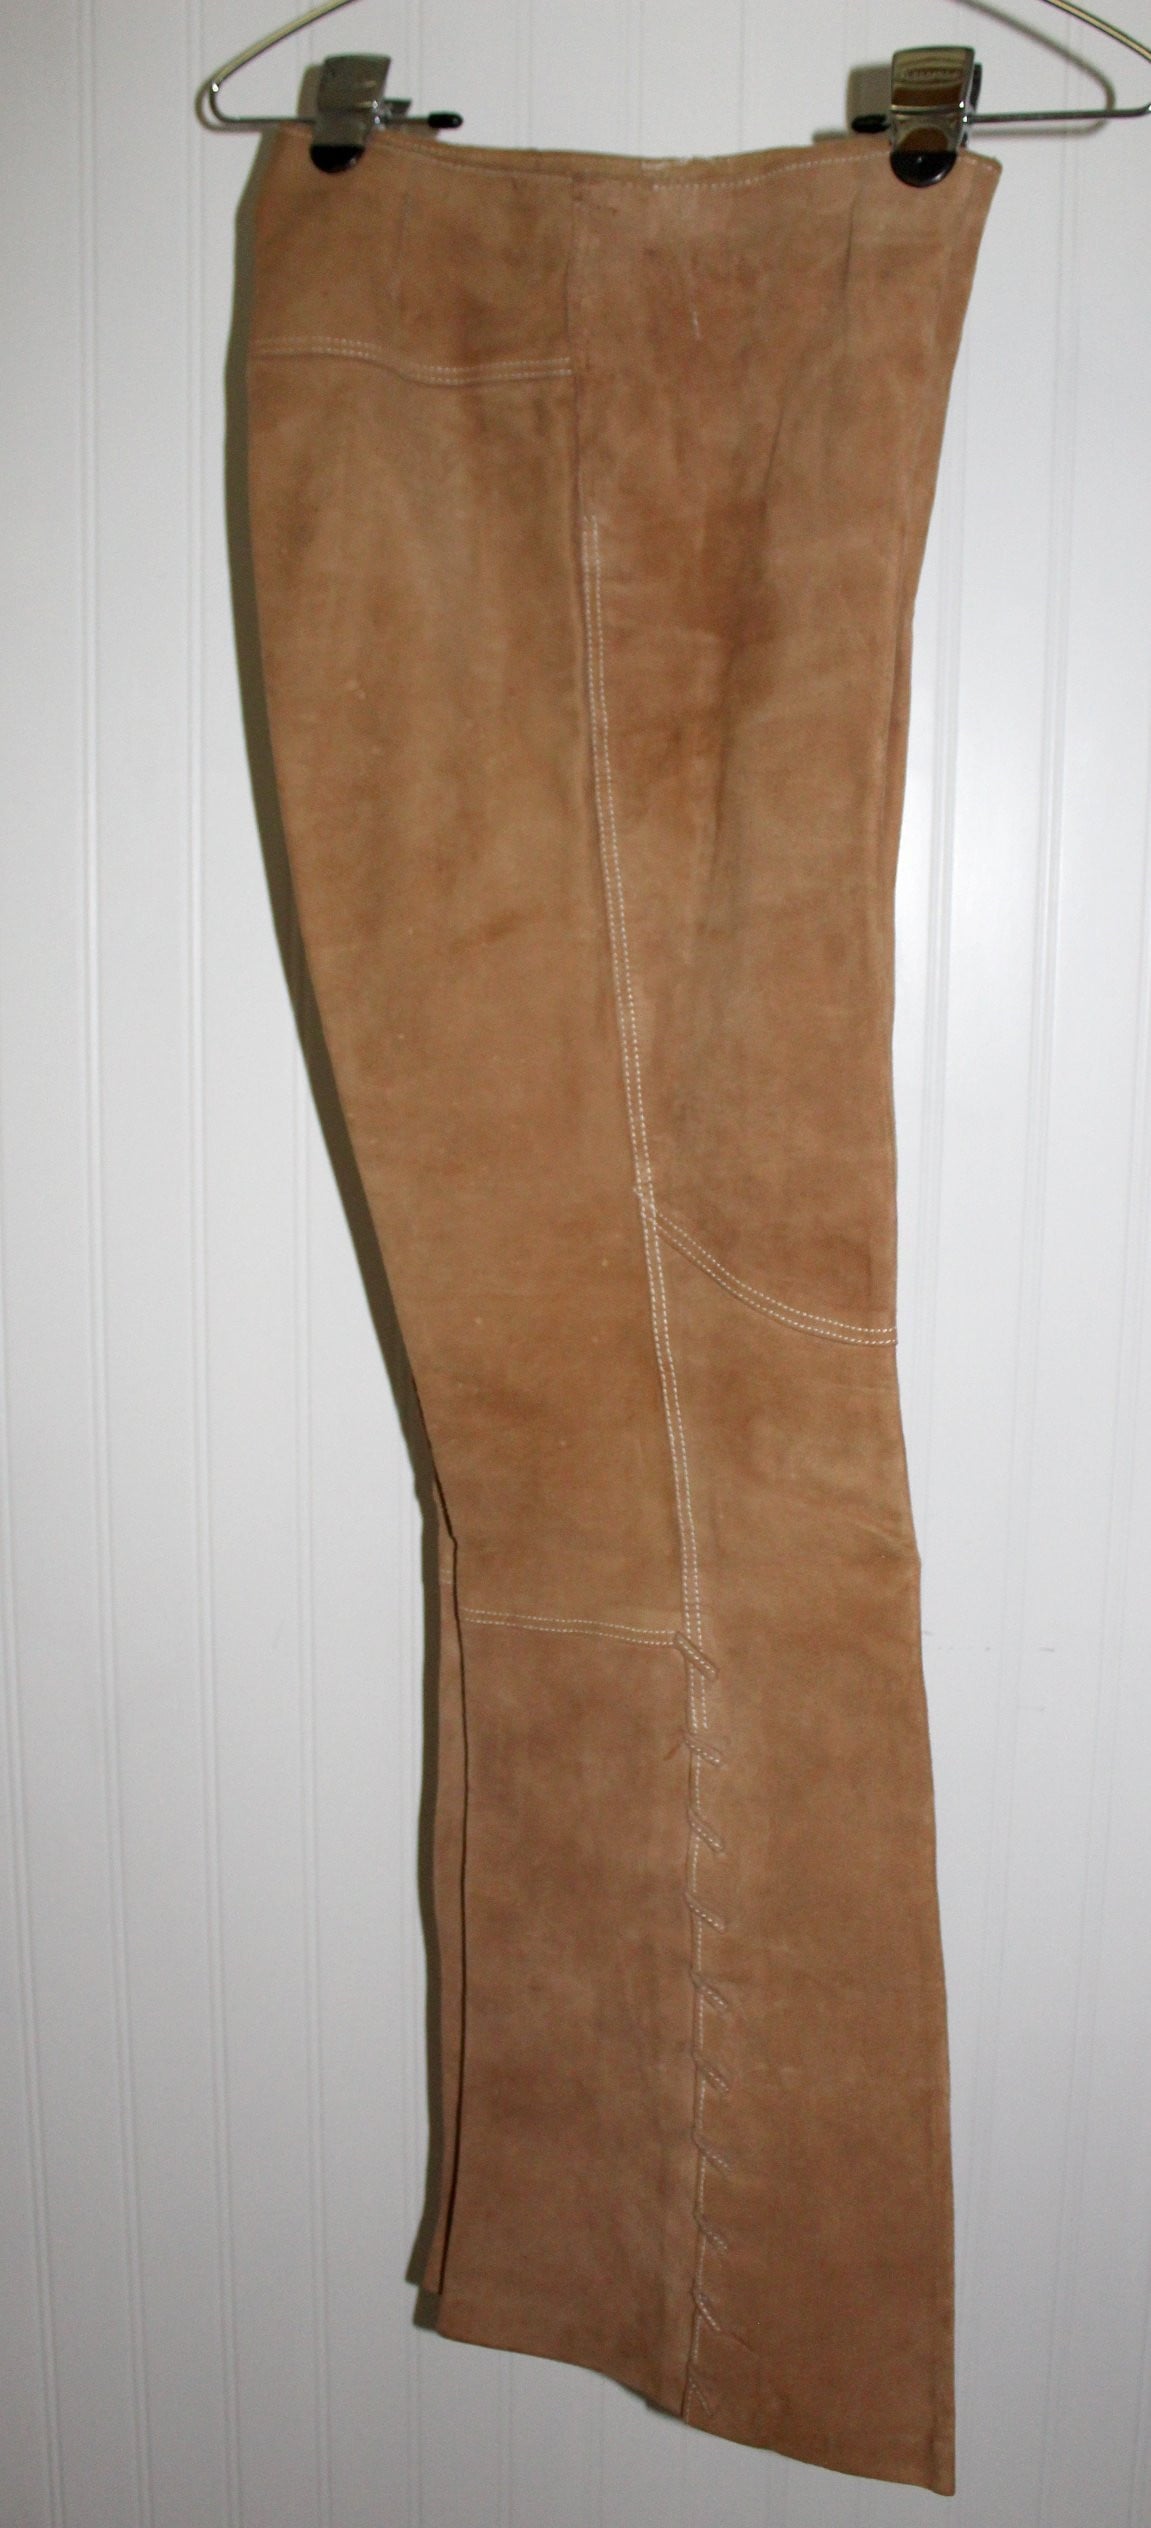 Vintage Leather Pants Laced Flare Leg Caramel Cream Top Stitch Great Detail disco